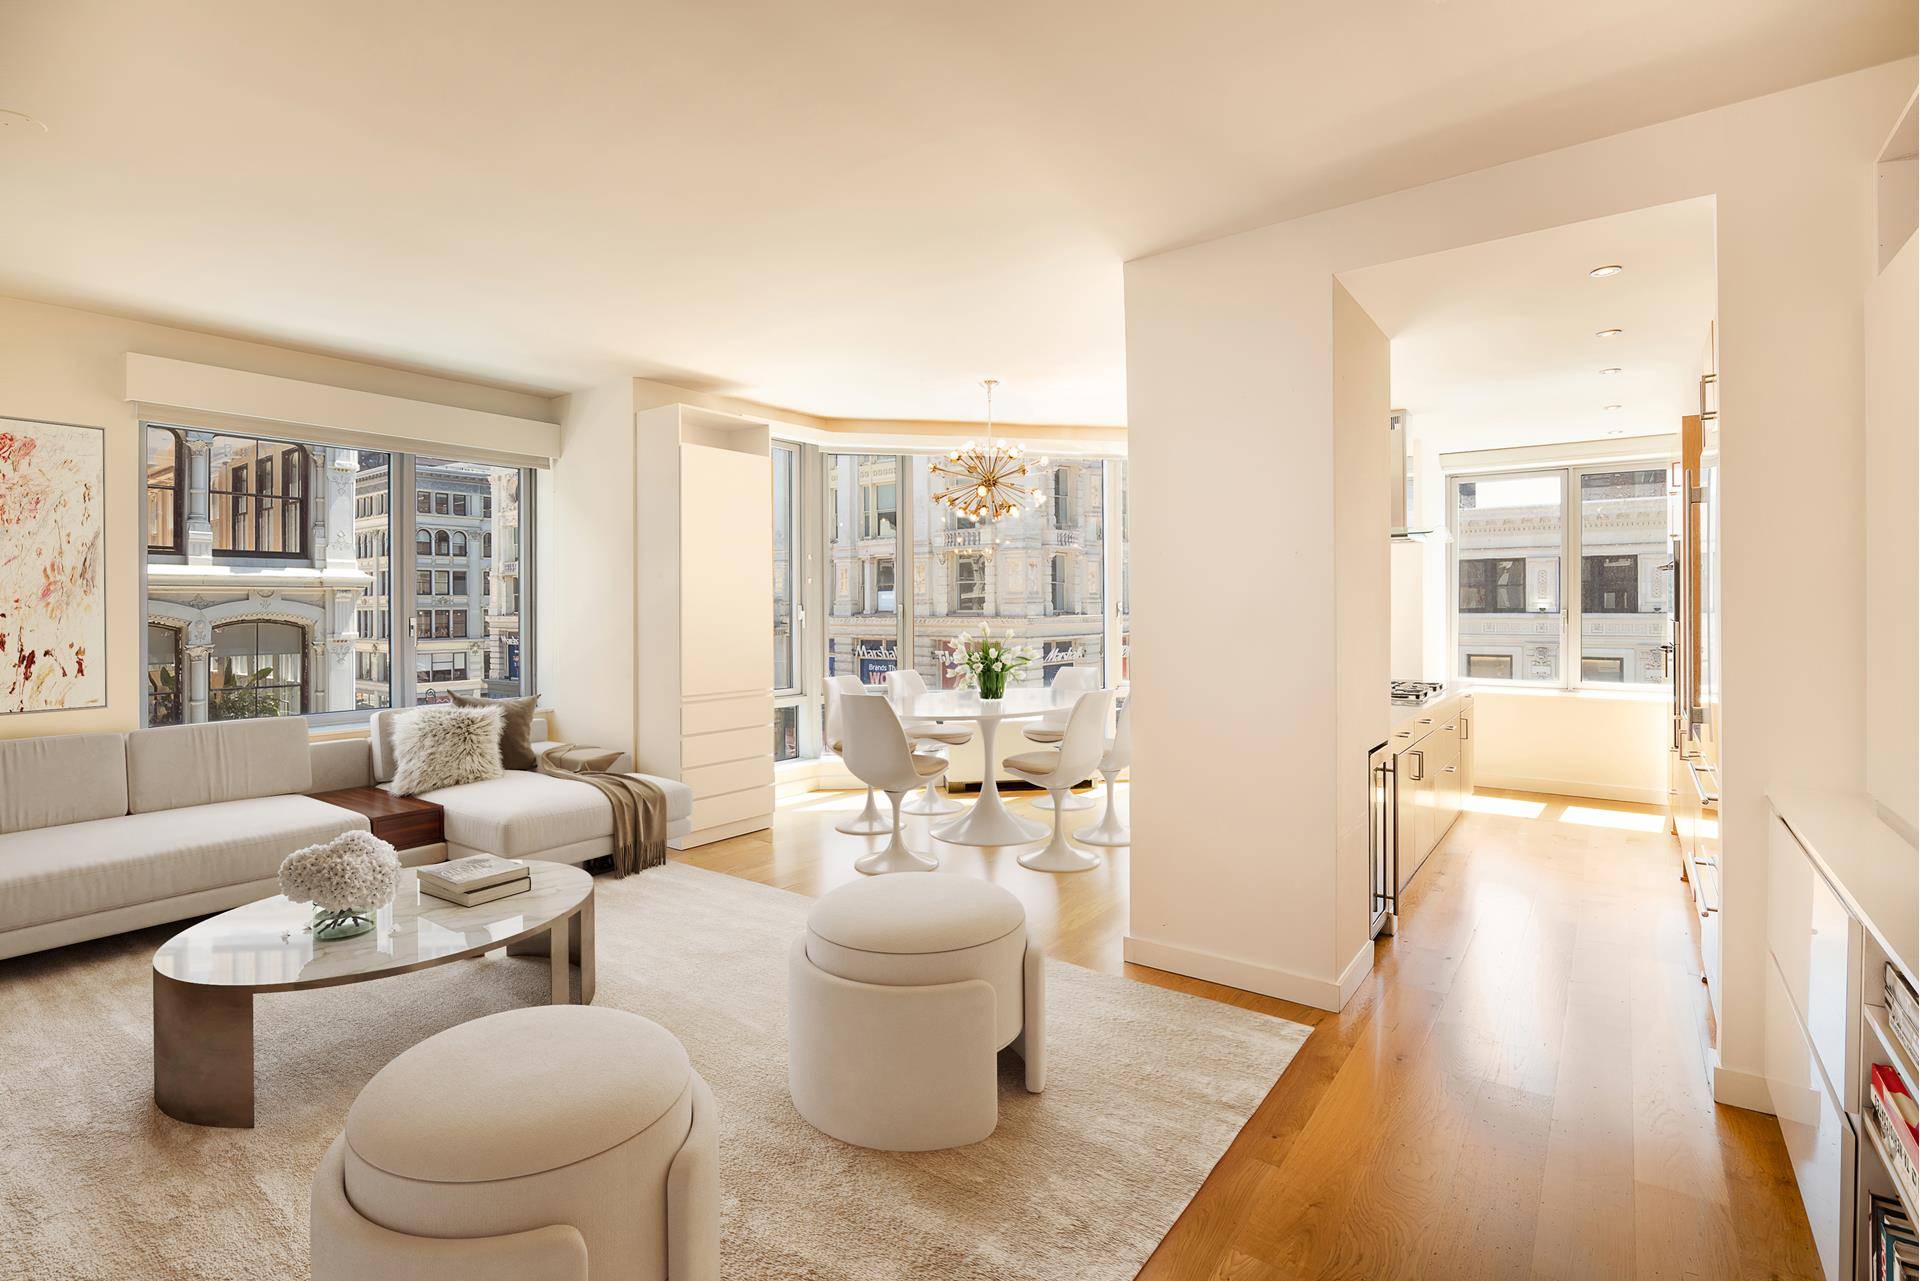 Tenant in Place until September 2023 Perfectly located at the intersection of West 18th Street and Avenue of The Americas, this airy and bright three bedroom, three bathroom condominium home ...